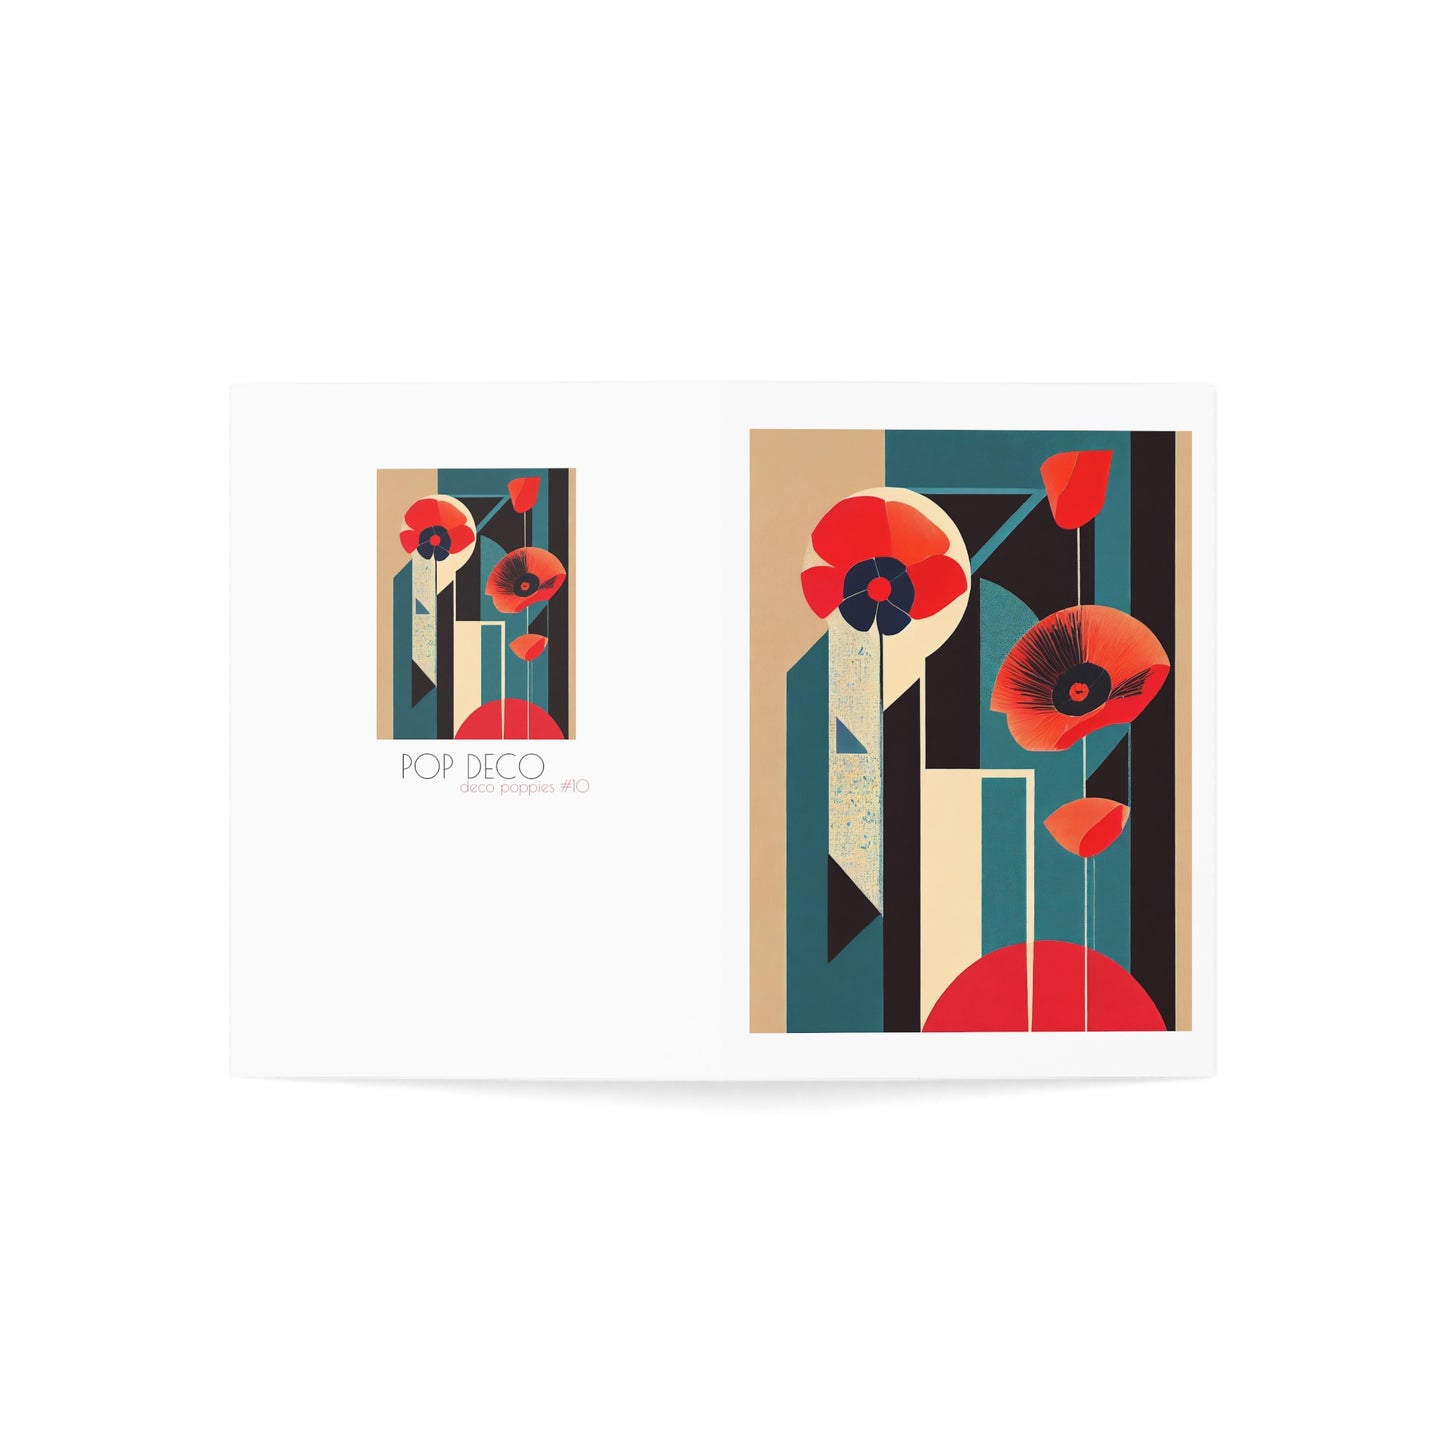 Art Deco Flower Card with Red Poppies Note Card Abstract Flower Birthday Card Art Deco Red Flowers Minimalist Flower Card for Mother's Day